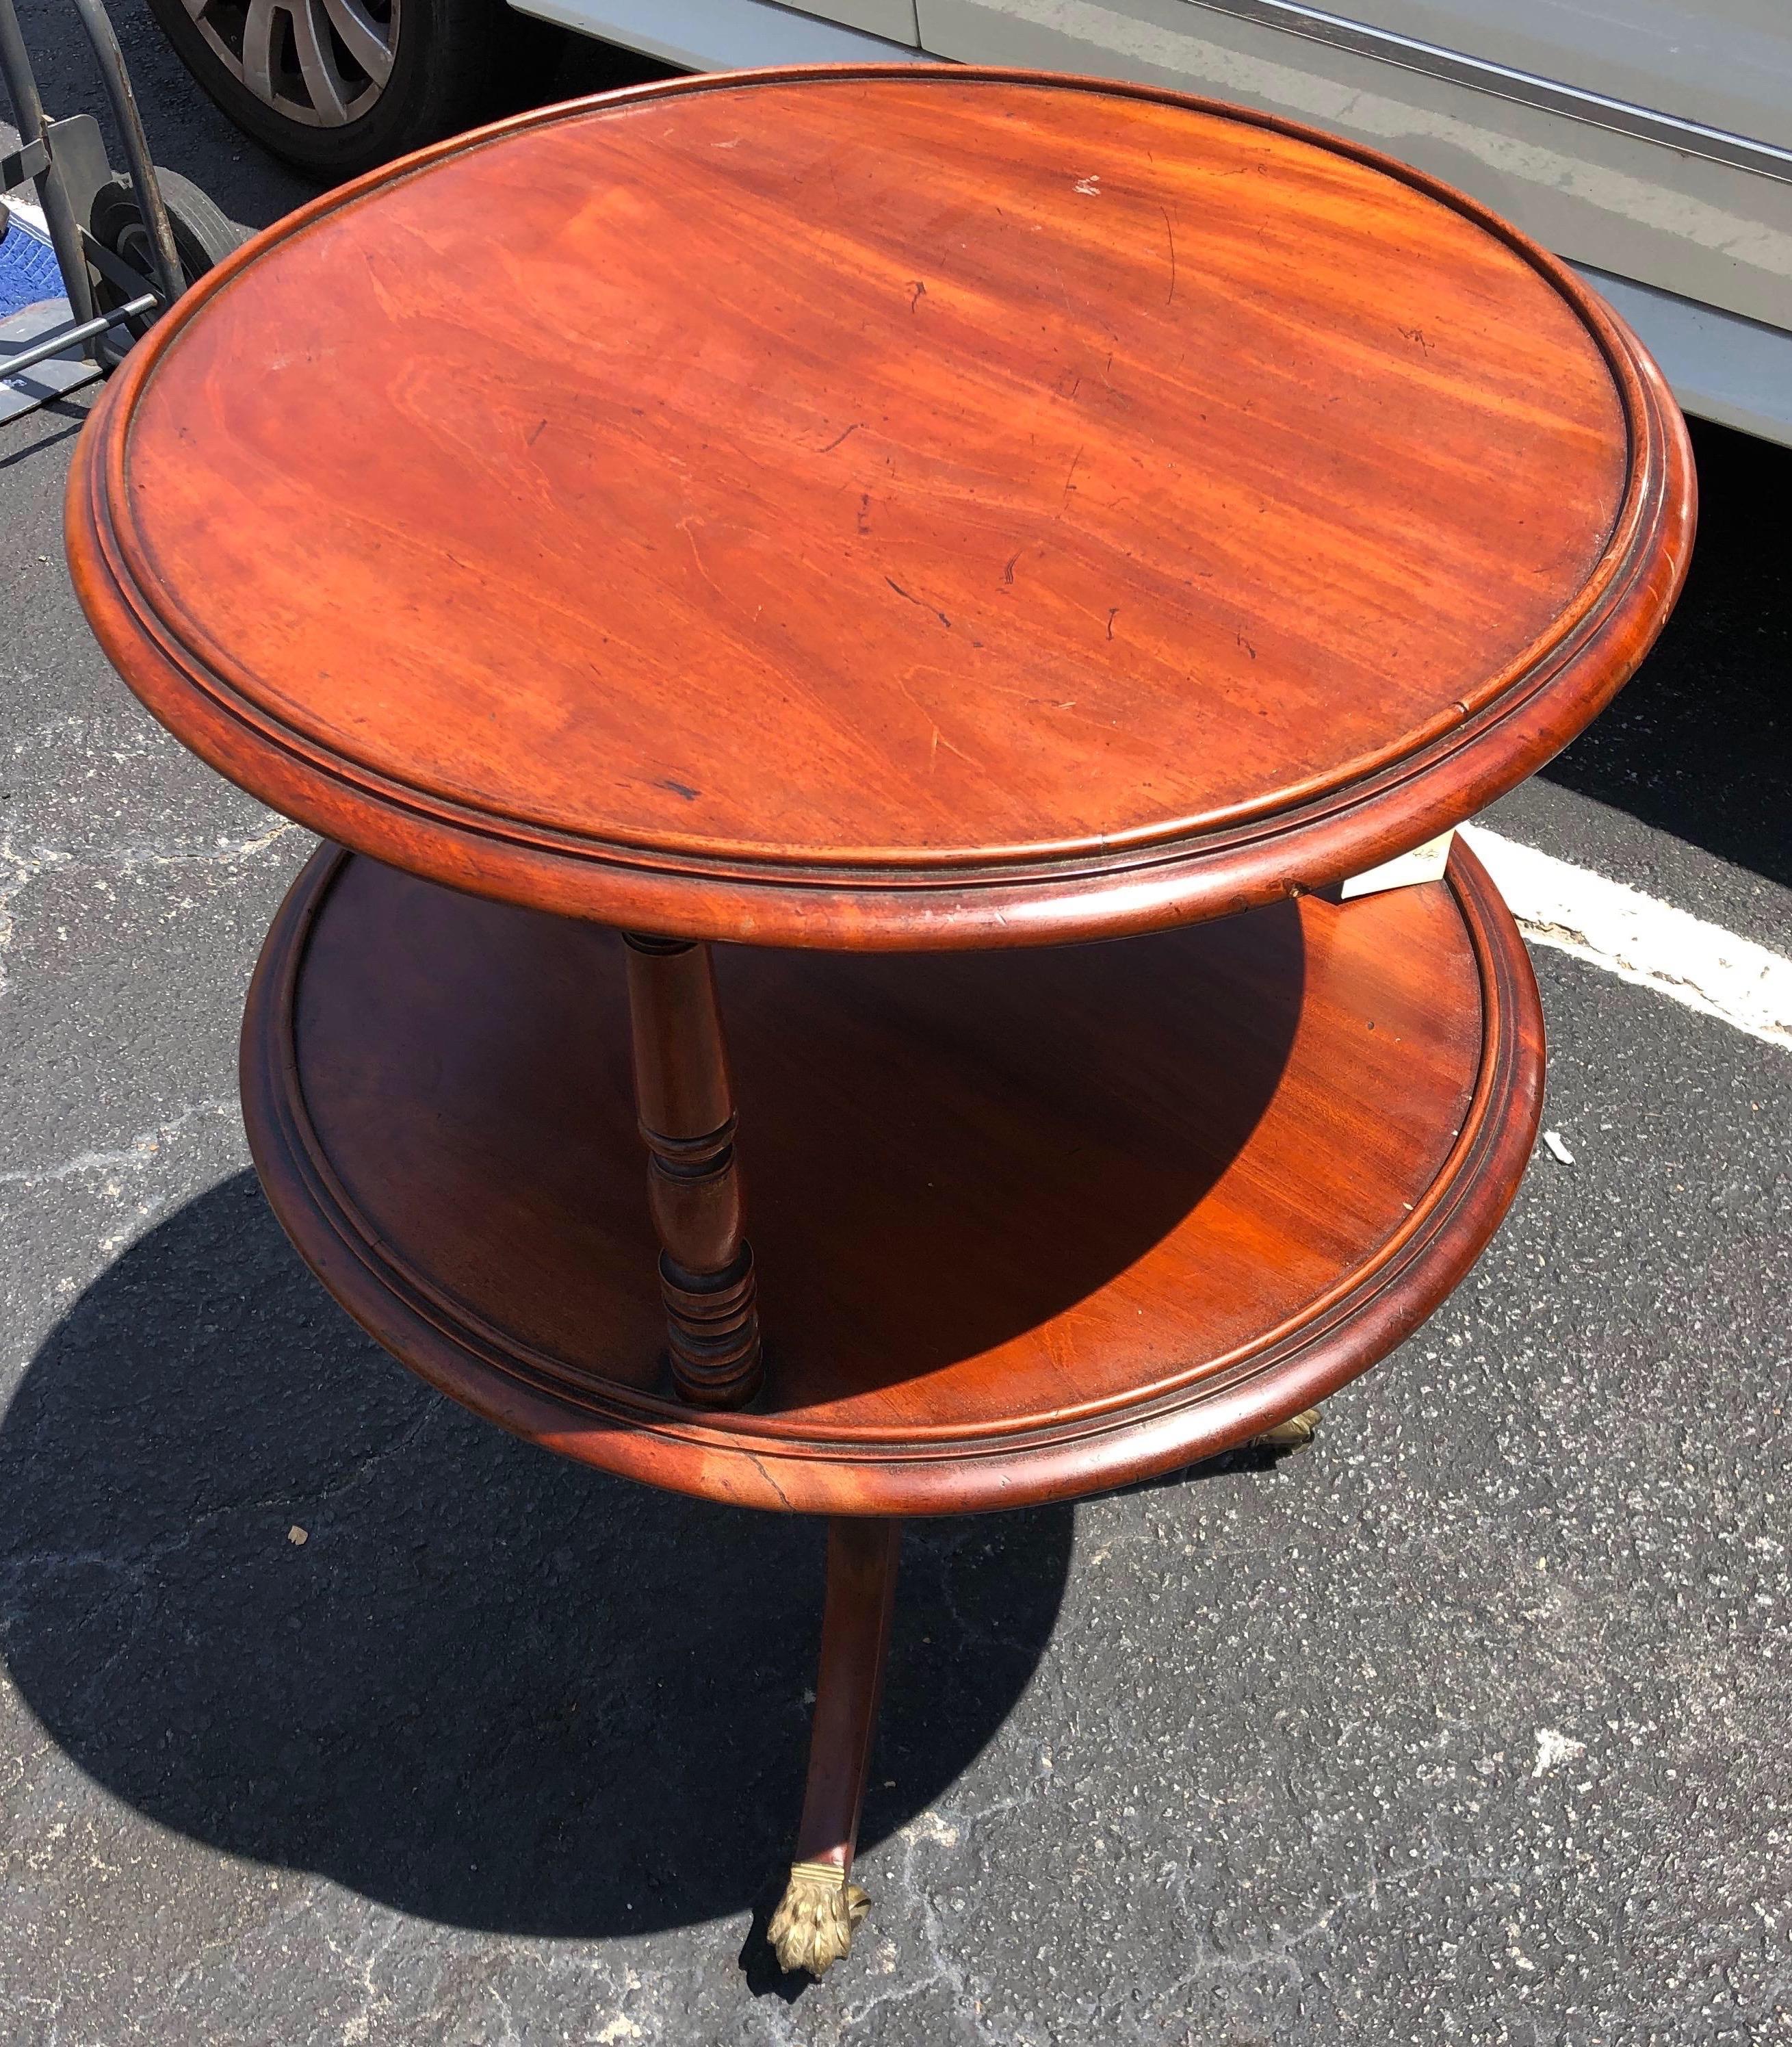 Late 18th-early 19th century Georgian mahogany two tier dumbwaiter with molded shelves, turned supports, sabre legs resting on original brass paw feet castors.

Great color and patina all around. Nice size- height is good for a side table.